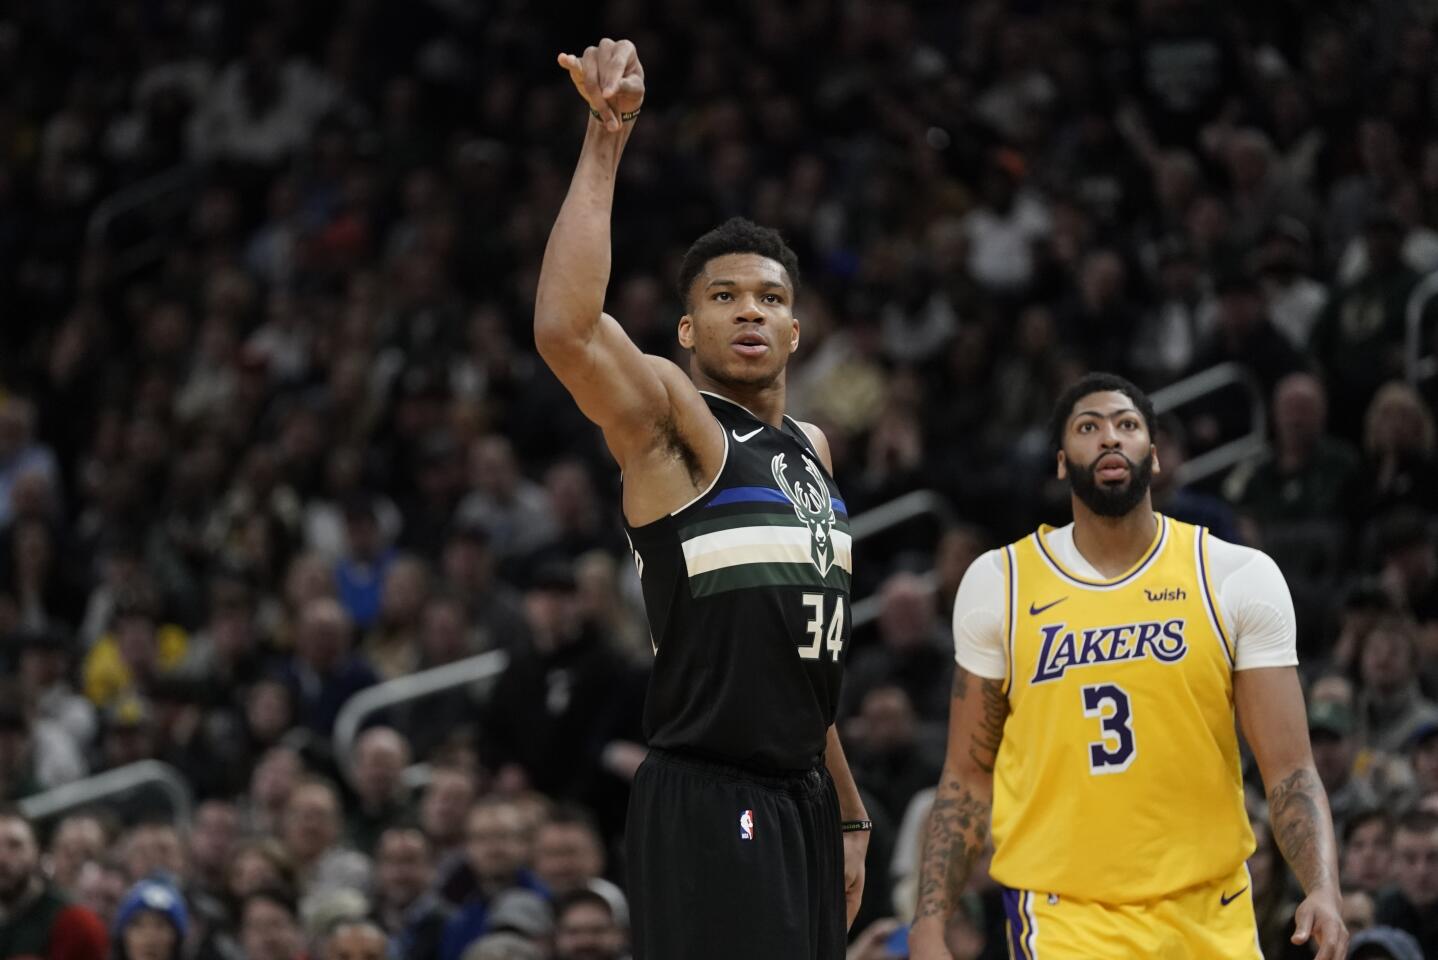 Milwaukee Bucks' Giannis Antetokounmpo makes a three-point basket in front of Los Angeles Lakers' Anthony Davis during the second half of an NBA basketball game Thursday, Dec. 19, 2019, in Milwaukee. The Bucks won 111-104. (AP Photo/Morry Gash)